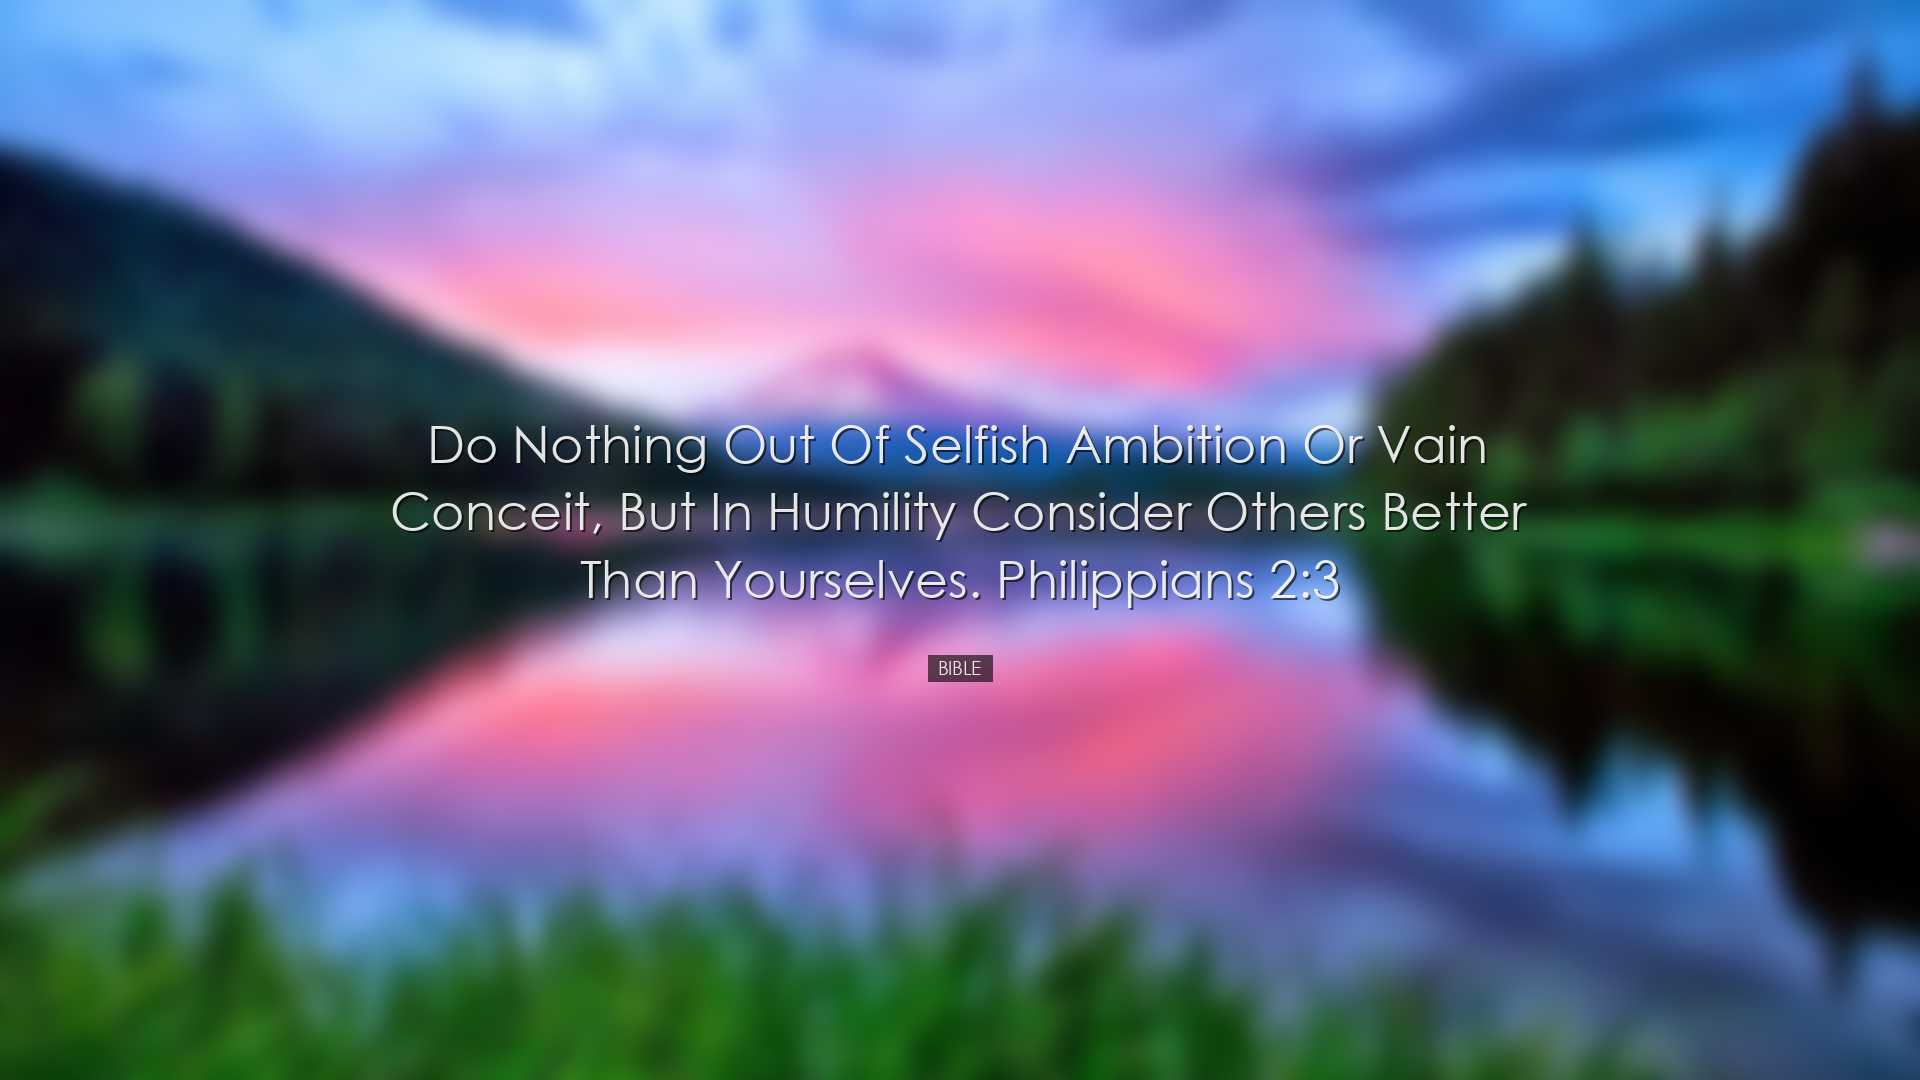 Do nothing out of selfish ambition or vain conceit, but in humilit